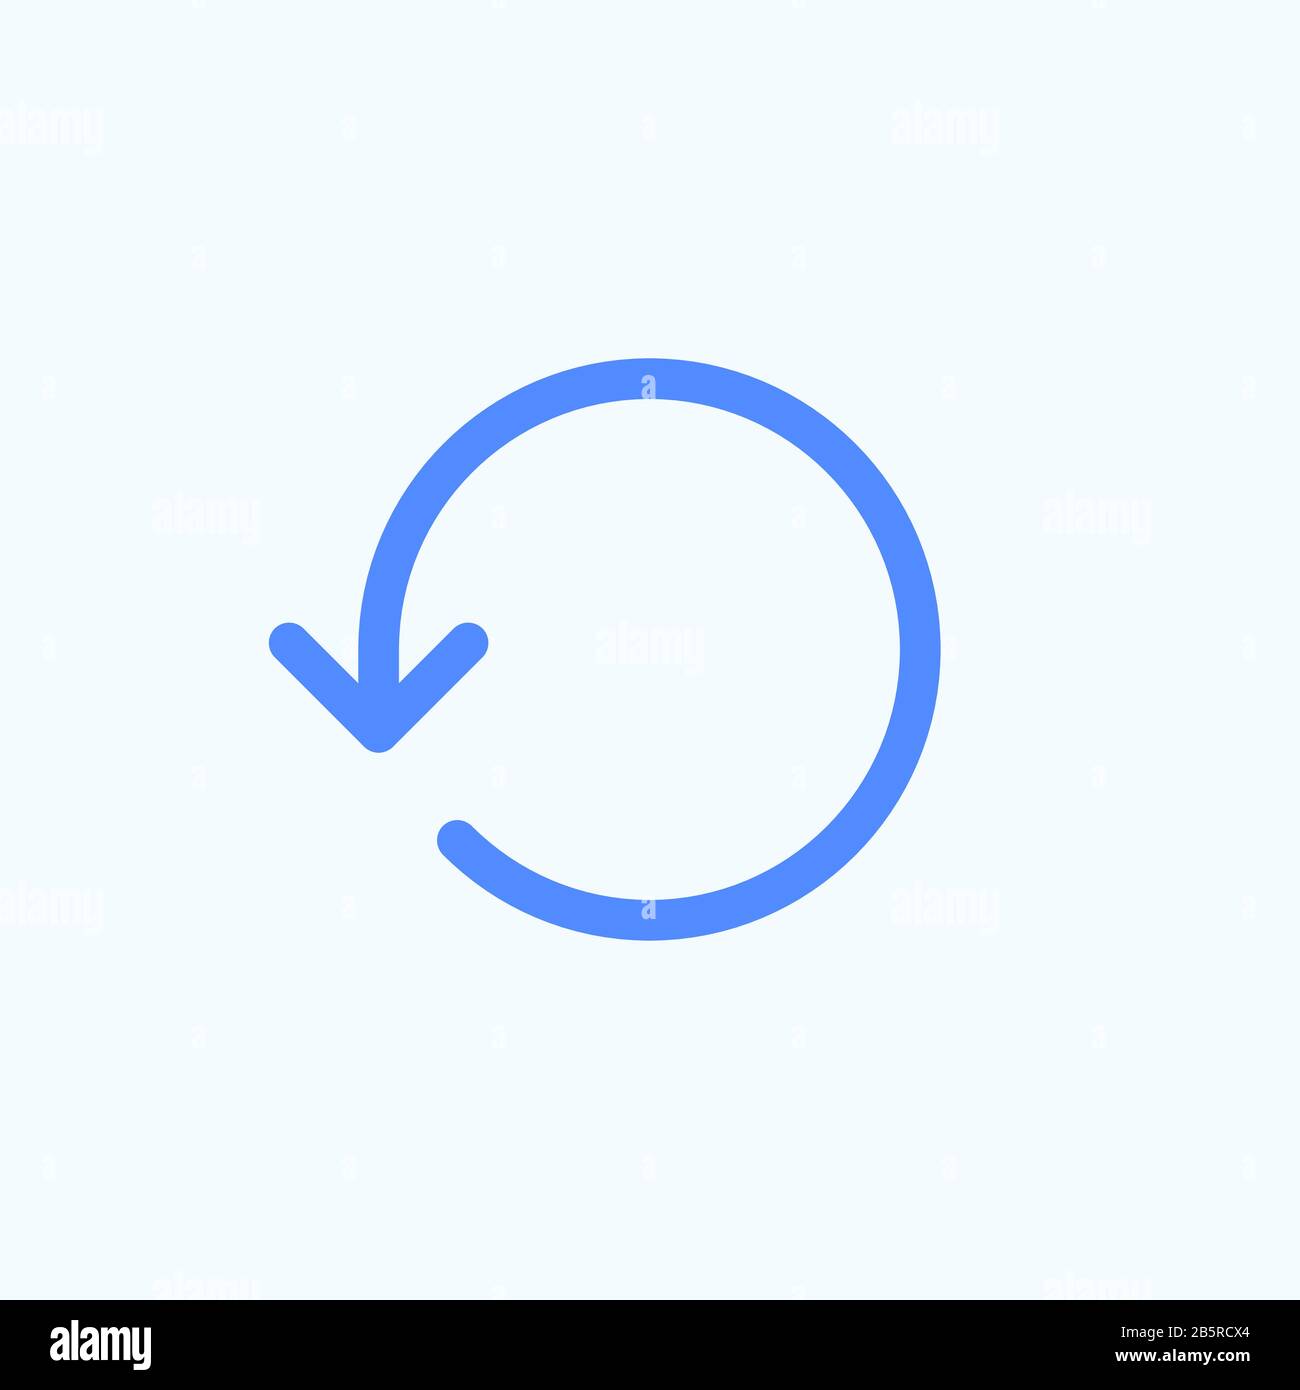 Outline a refresh icon for the website design. Rounded and thin vector illustration of the reload icon. Stock Vector